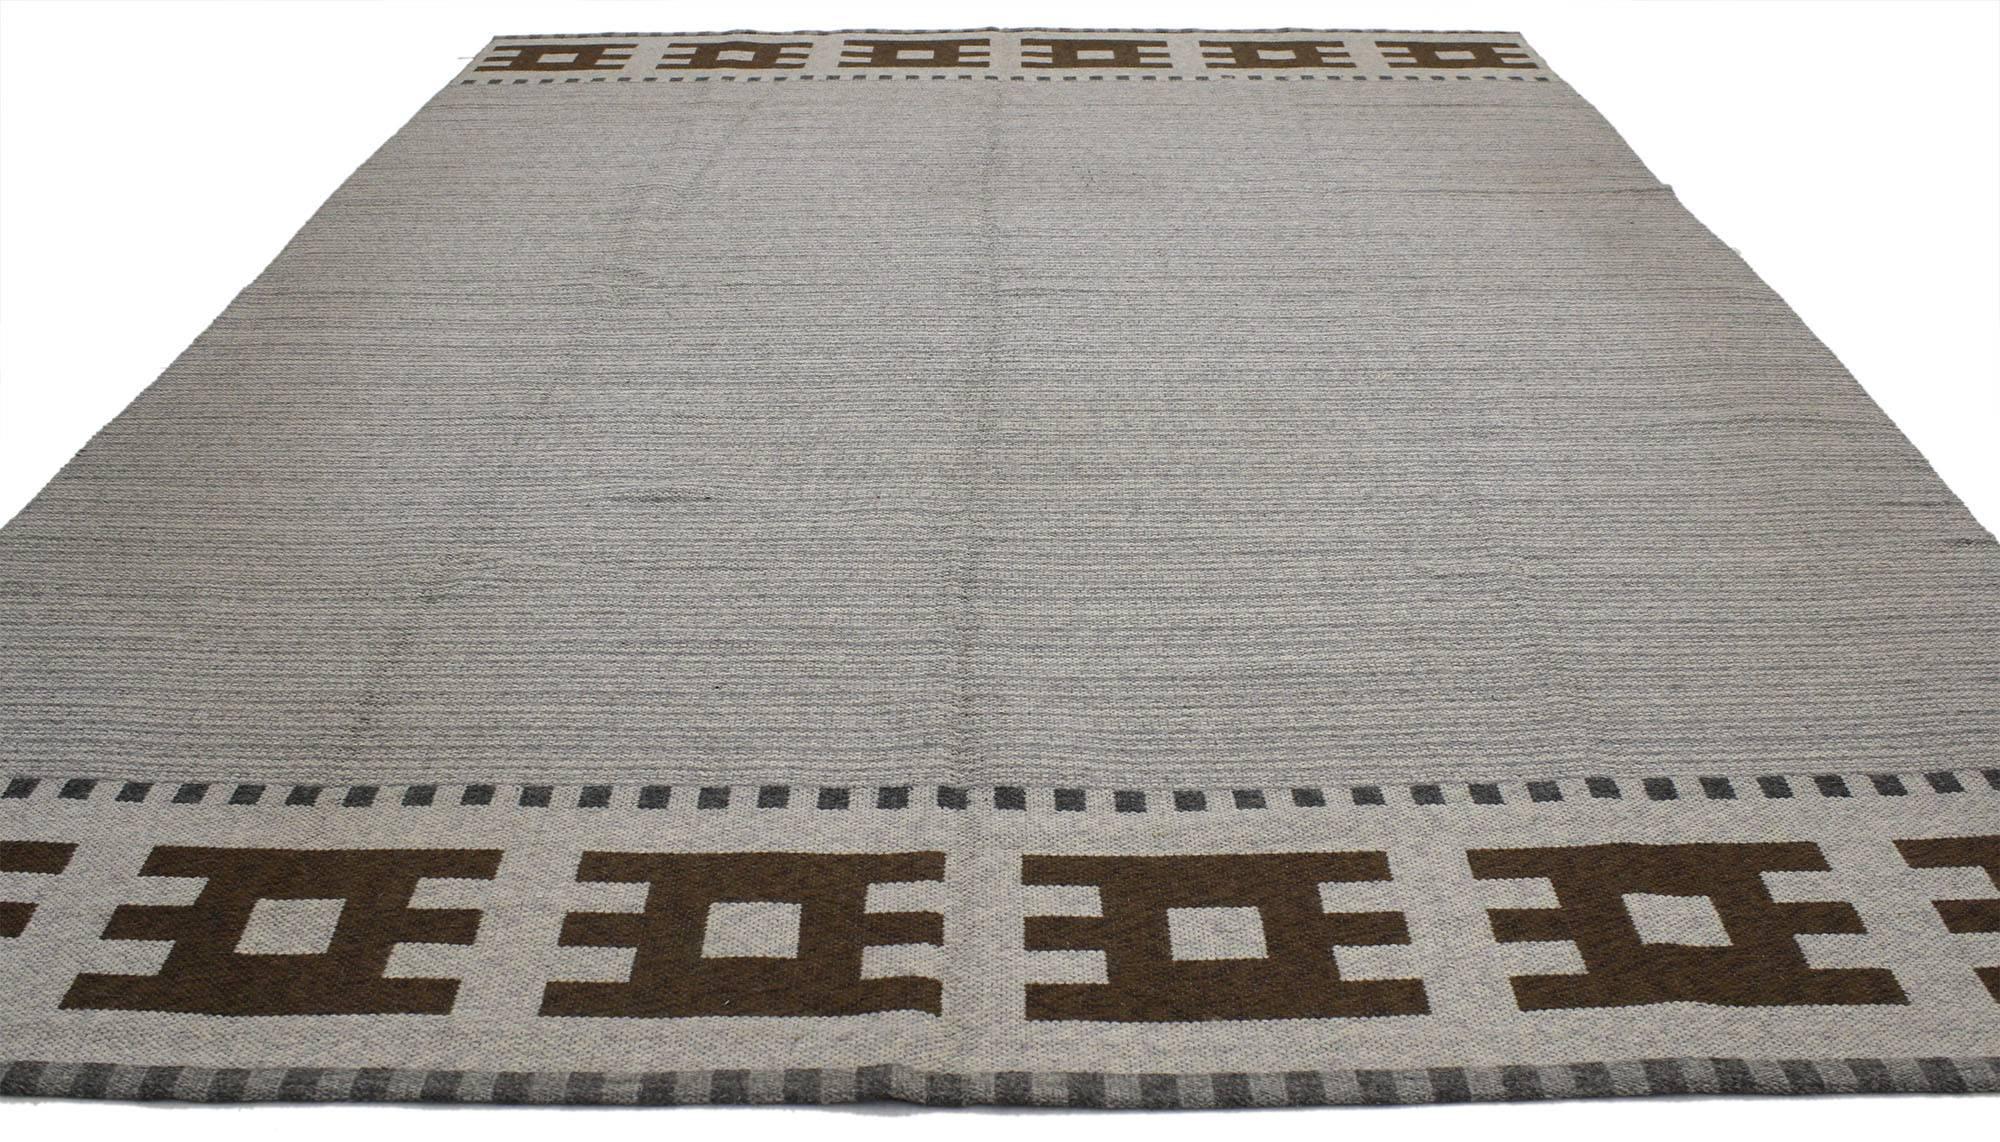 77037, vintage Swedish Kilim rug with Scandinavian Modern style - Rollakan flat-weave rug. This handwoven wool vintage Swedish Kilim rug with Scandinavian Modern style features an abrash gray striated field. It is enclosed with coffee colored bands